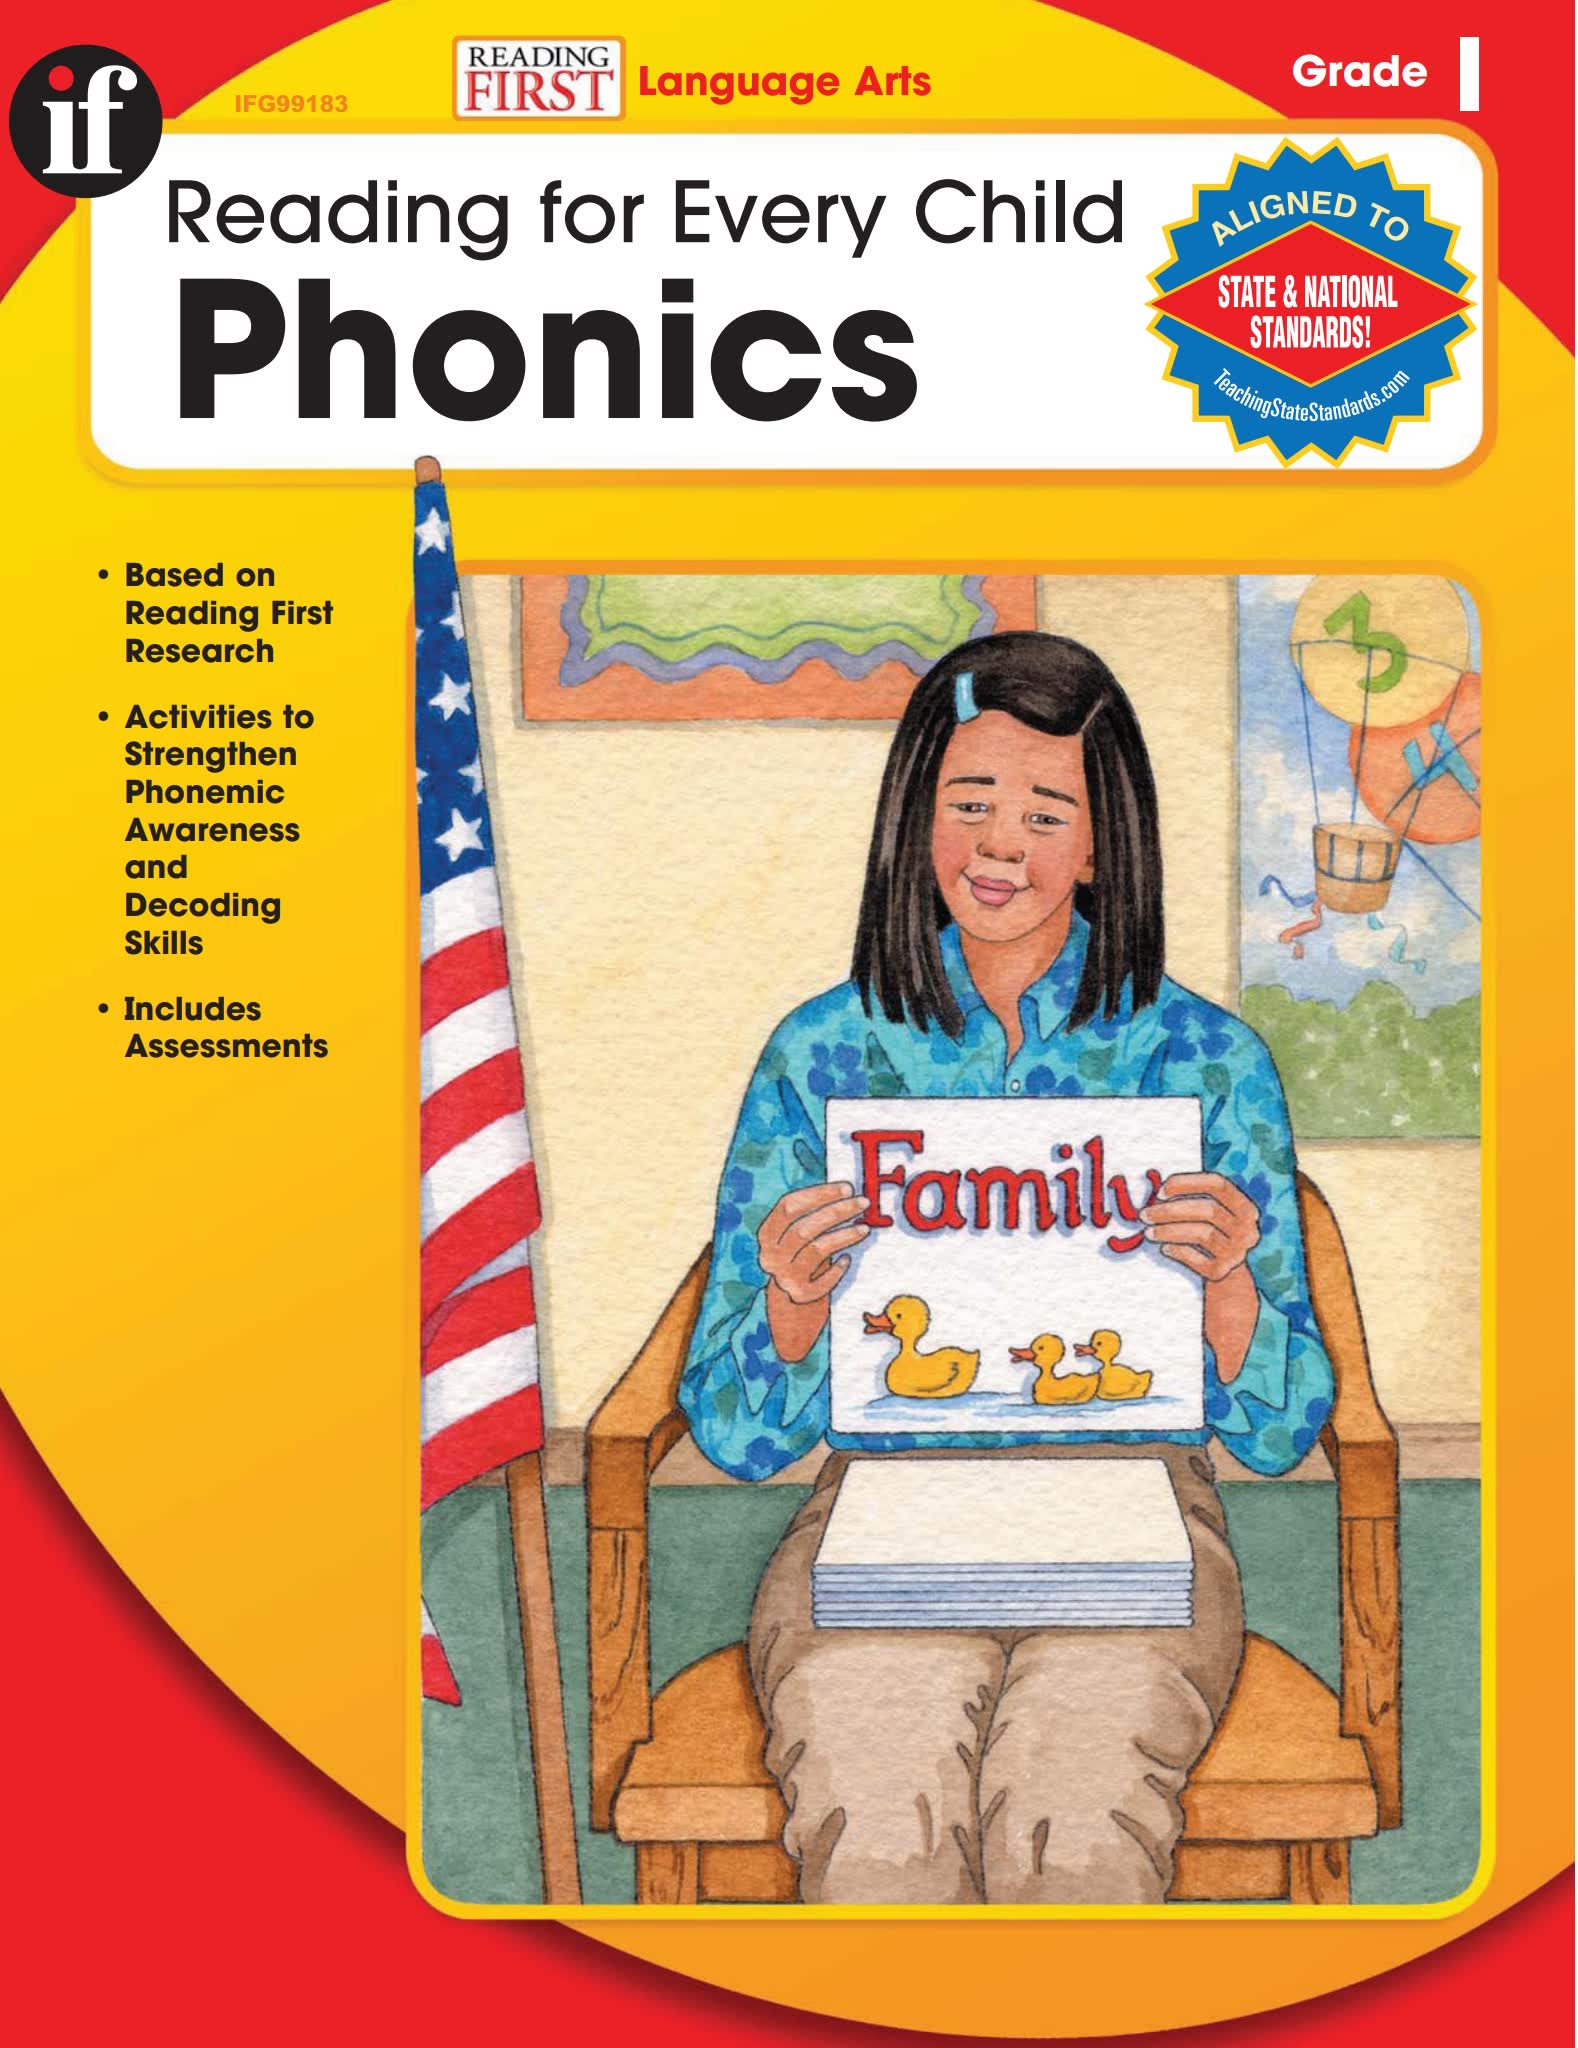 Reading-for-Every-Child-Phonics-Grade-1